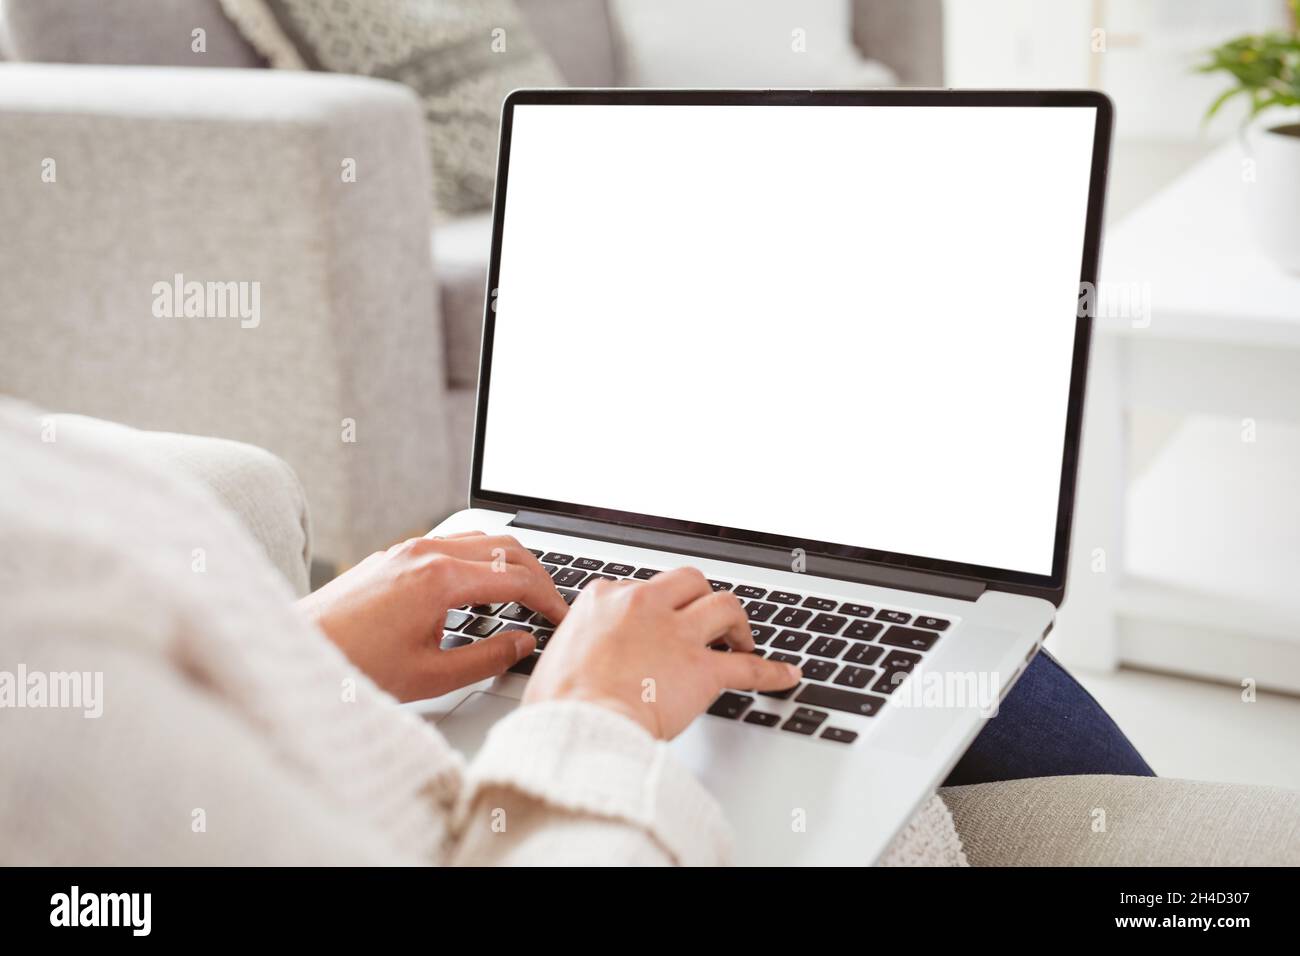 Hands of woman working remotely from home on laptop with copy space Stock Photo